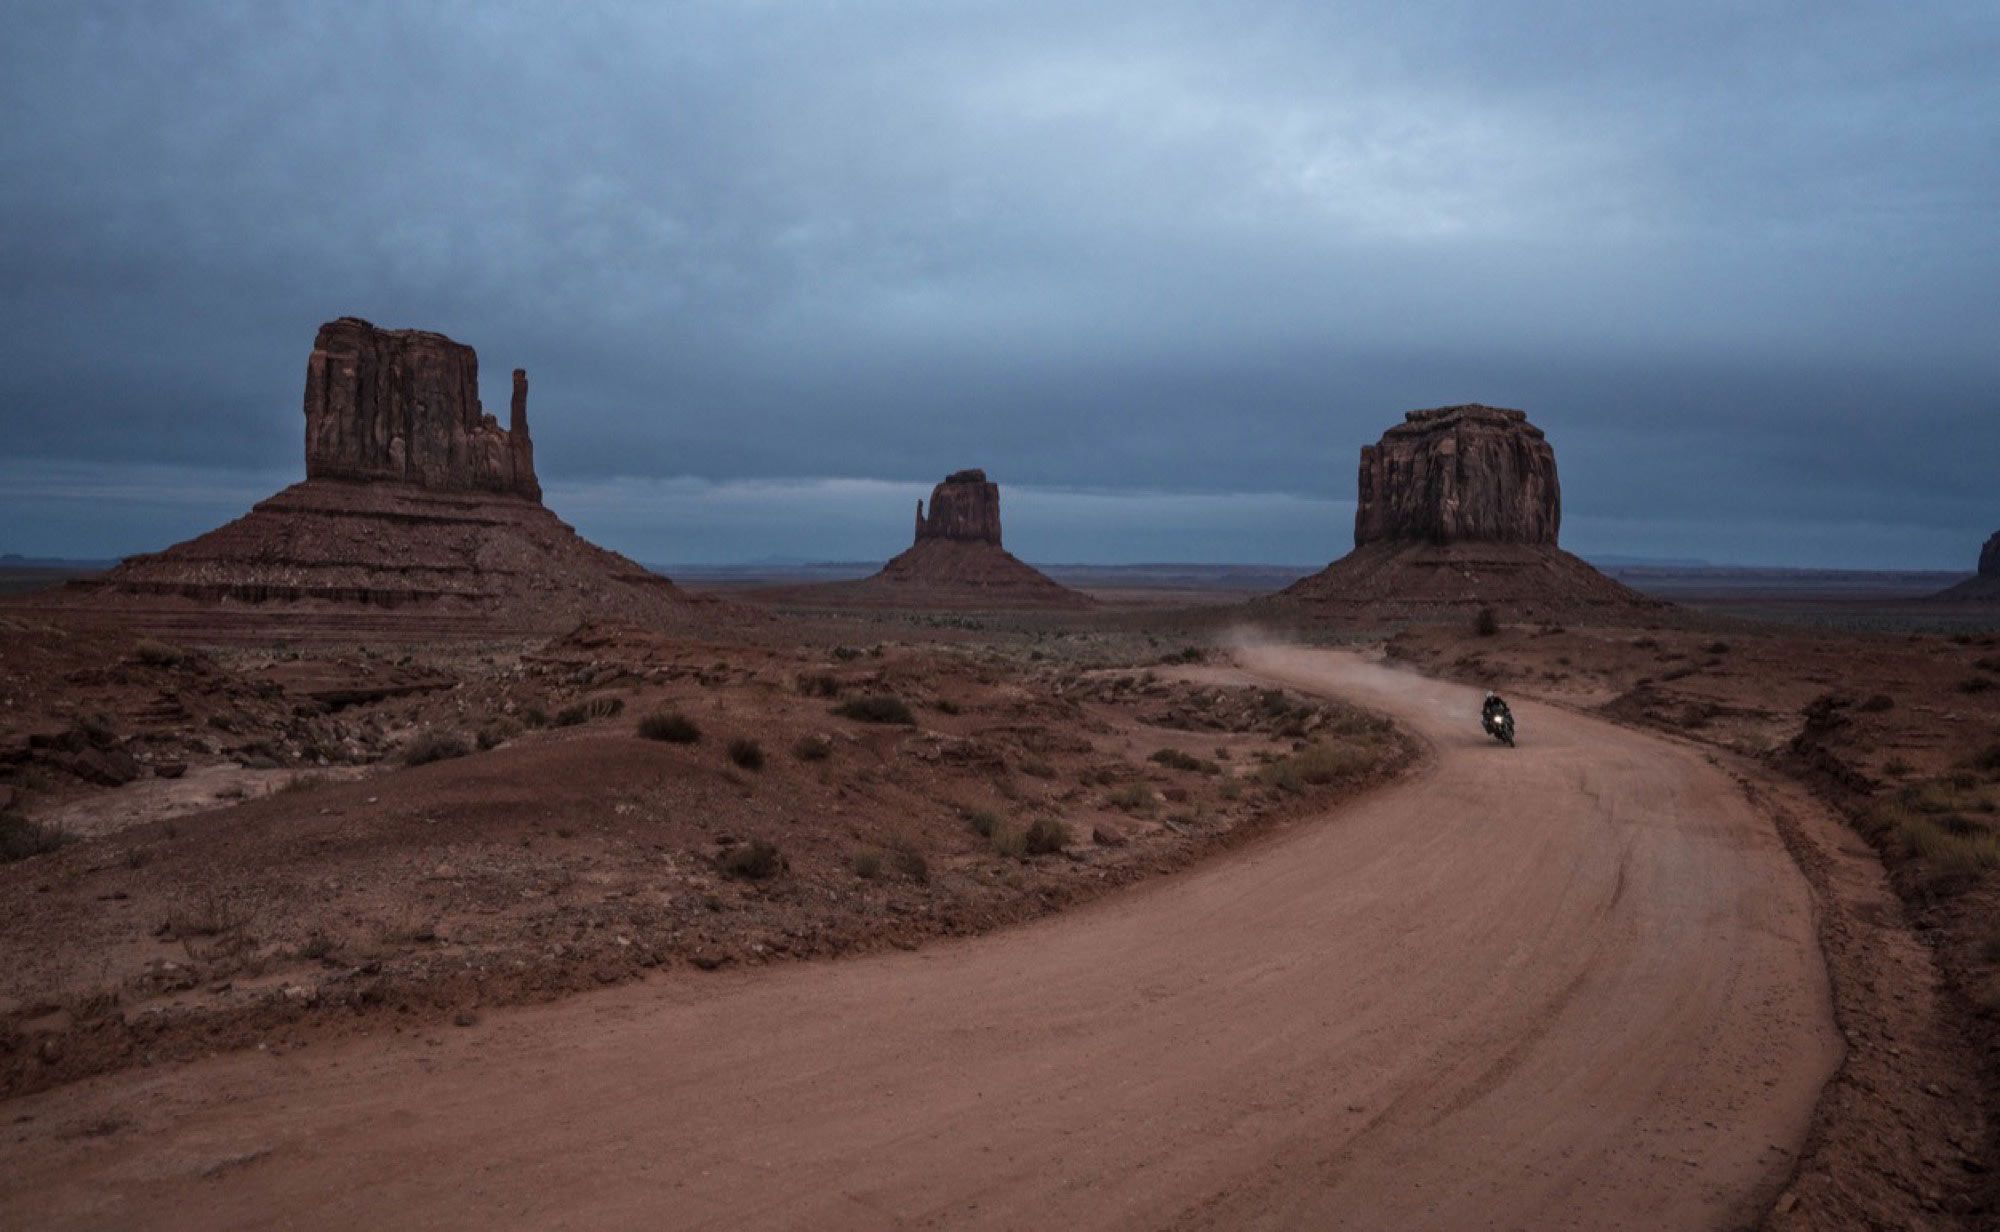 How fast is too fast? Dunno. Jase hasn’t worked it out yet. What I do know after our big moto trip is that “the joy of life comes from our encounters with new experiences, and hence there is no greater joy than to have an endlessly changing horizon” (Chris McCandless). (Monument Valley, Arizona)